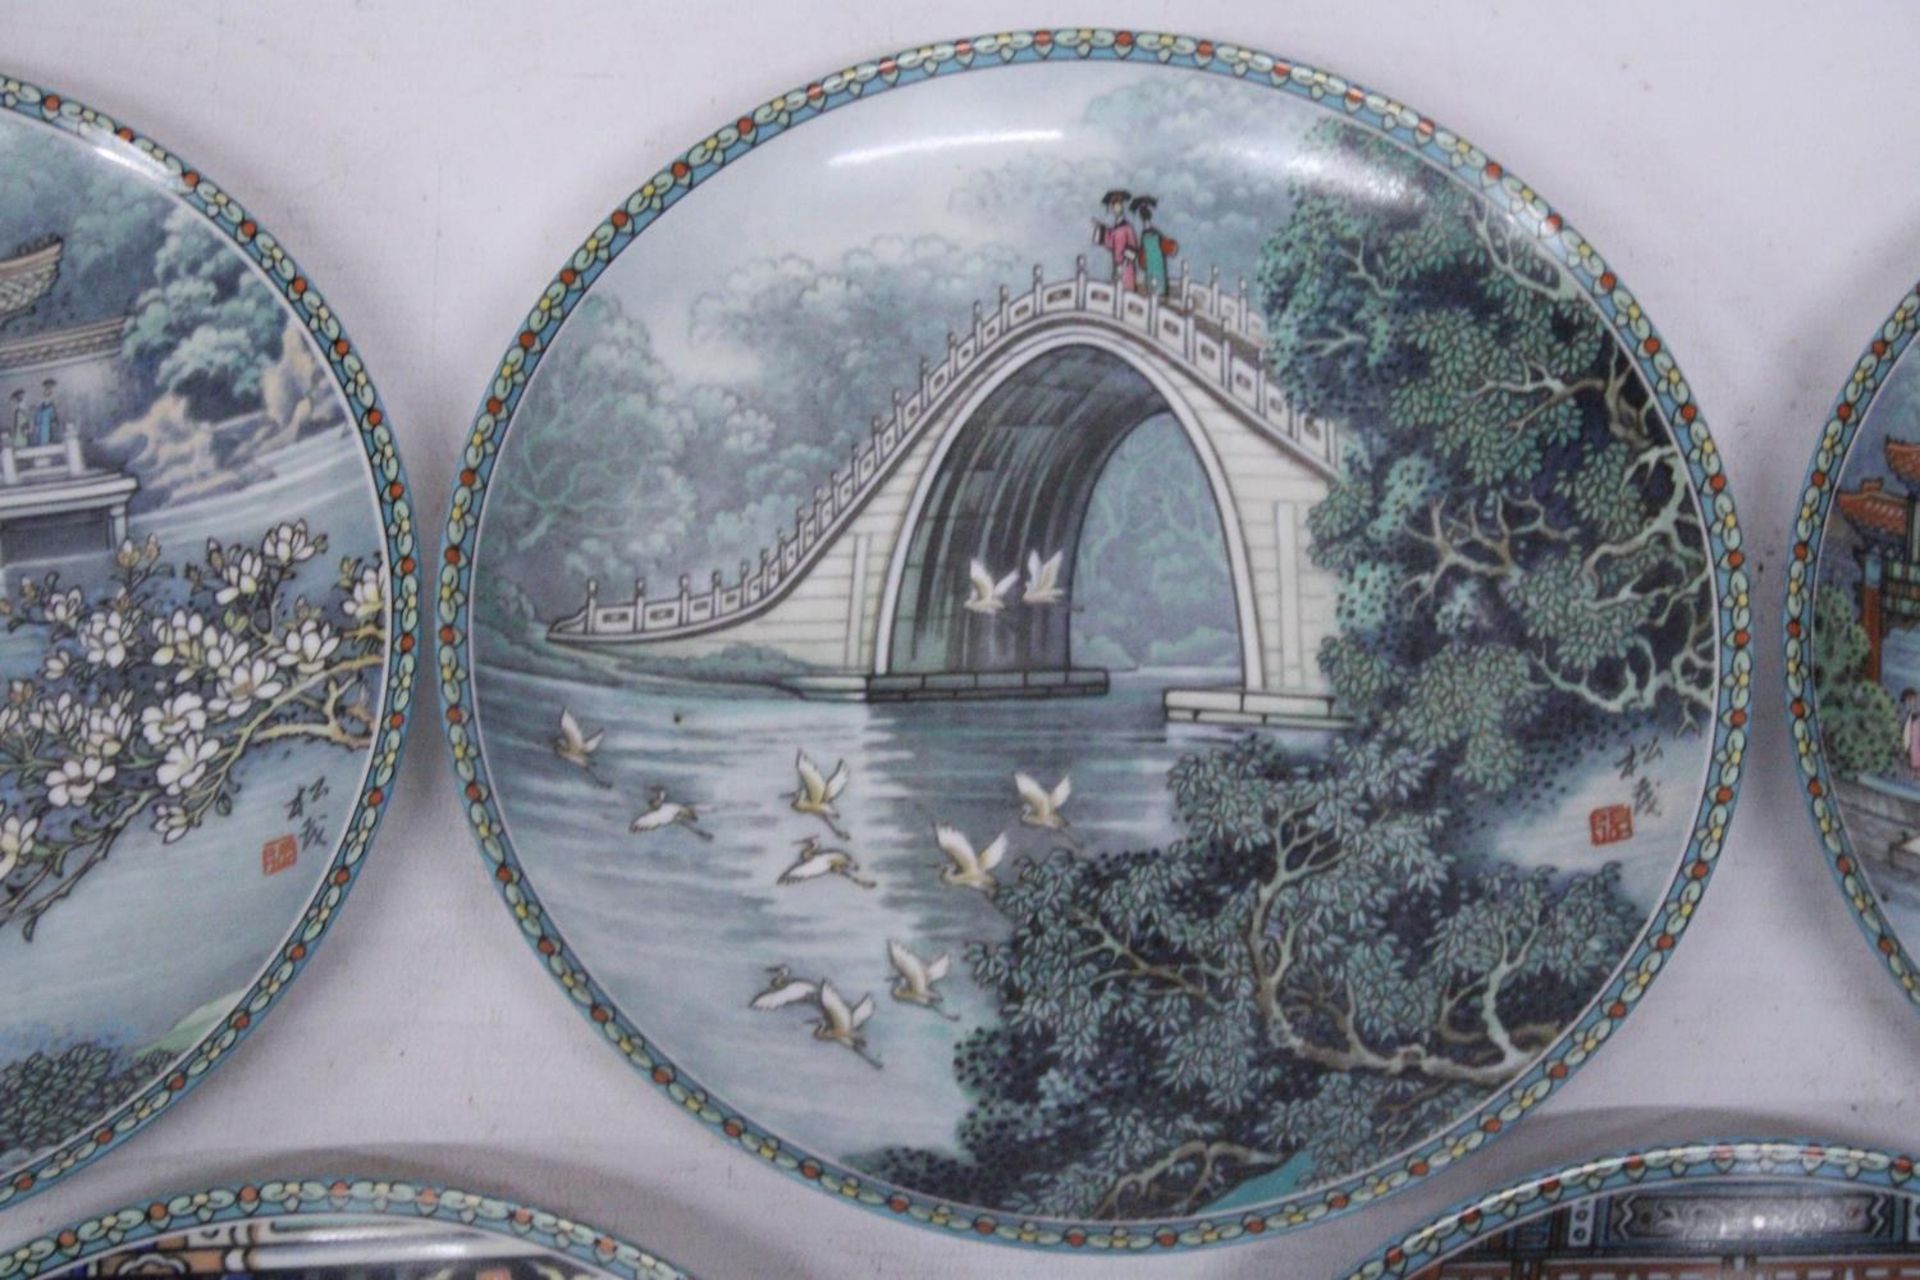 FIVE VINTAGE IMPERIAL JINGDEZHEN PORCELAIN PLATES SCENES FROM THE SUMMER PALACE - 21 CM - Image 3 of 8